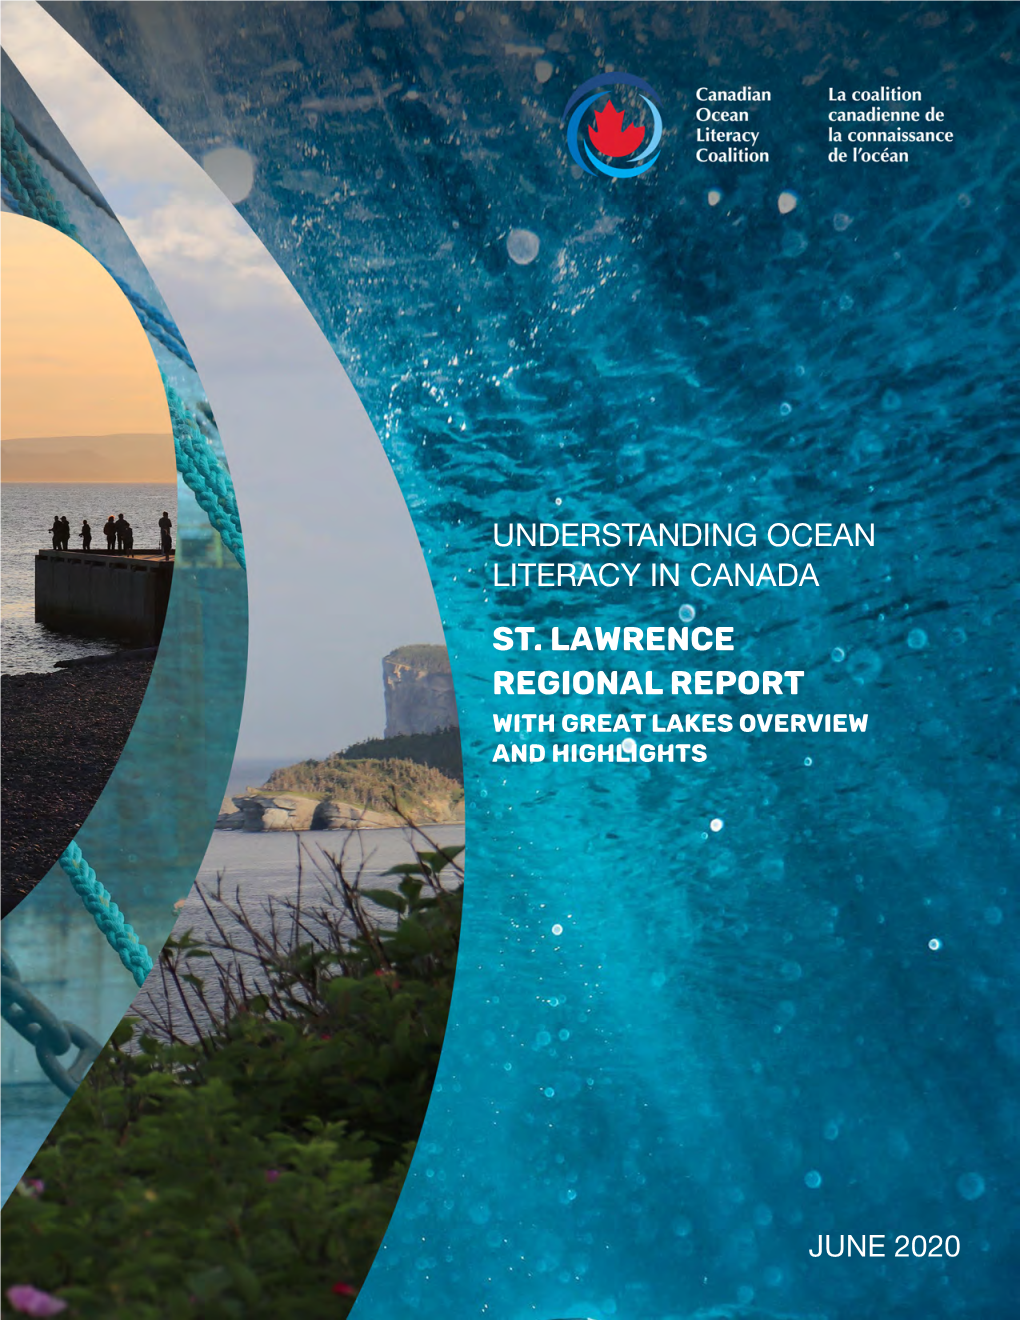 ST. LAWRENCE REGIONAL Report: with GREAT LAKES OVERVIEW and HIGHLIGHTS